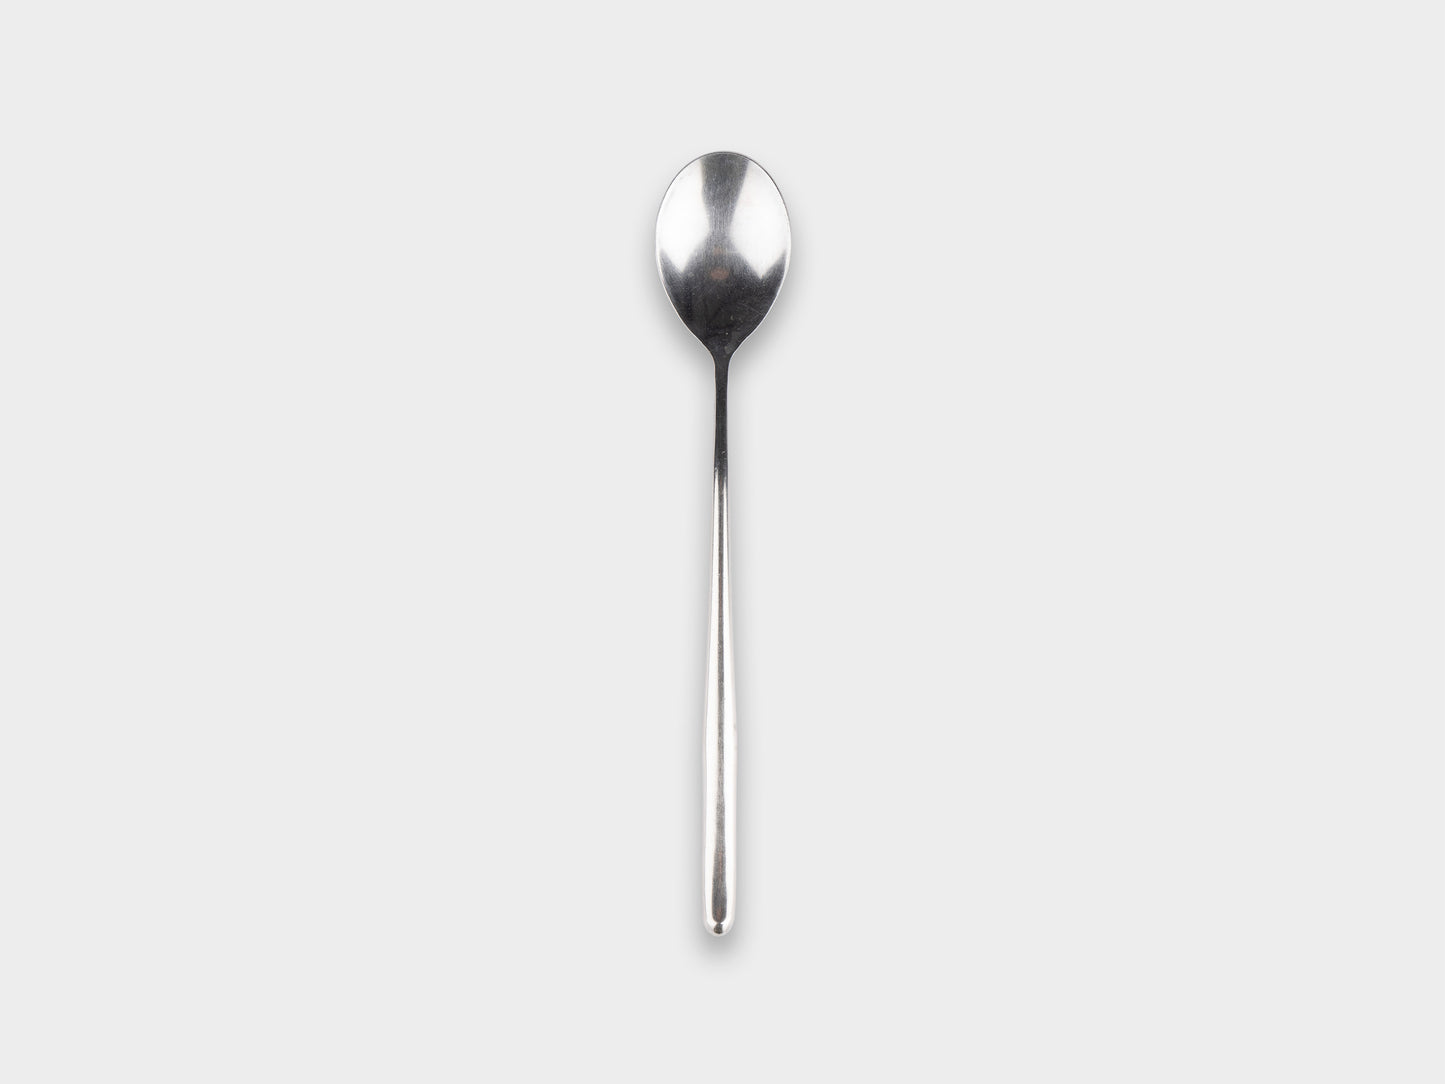 KM Stainless Spoon Used